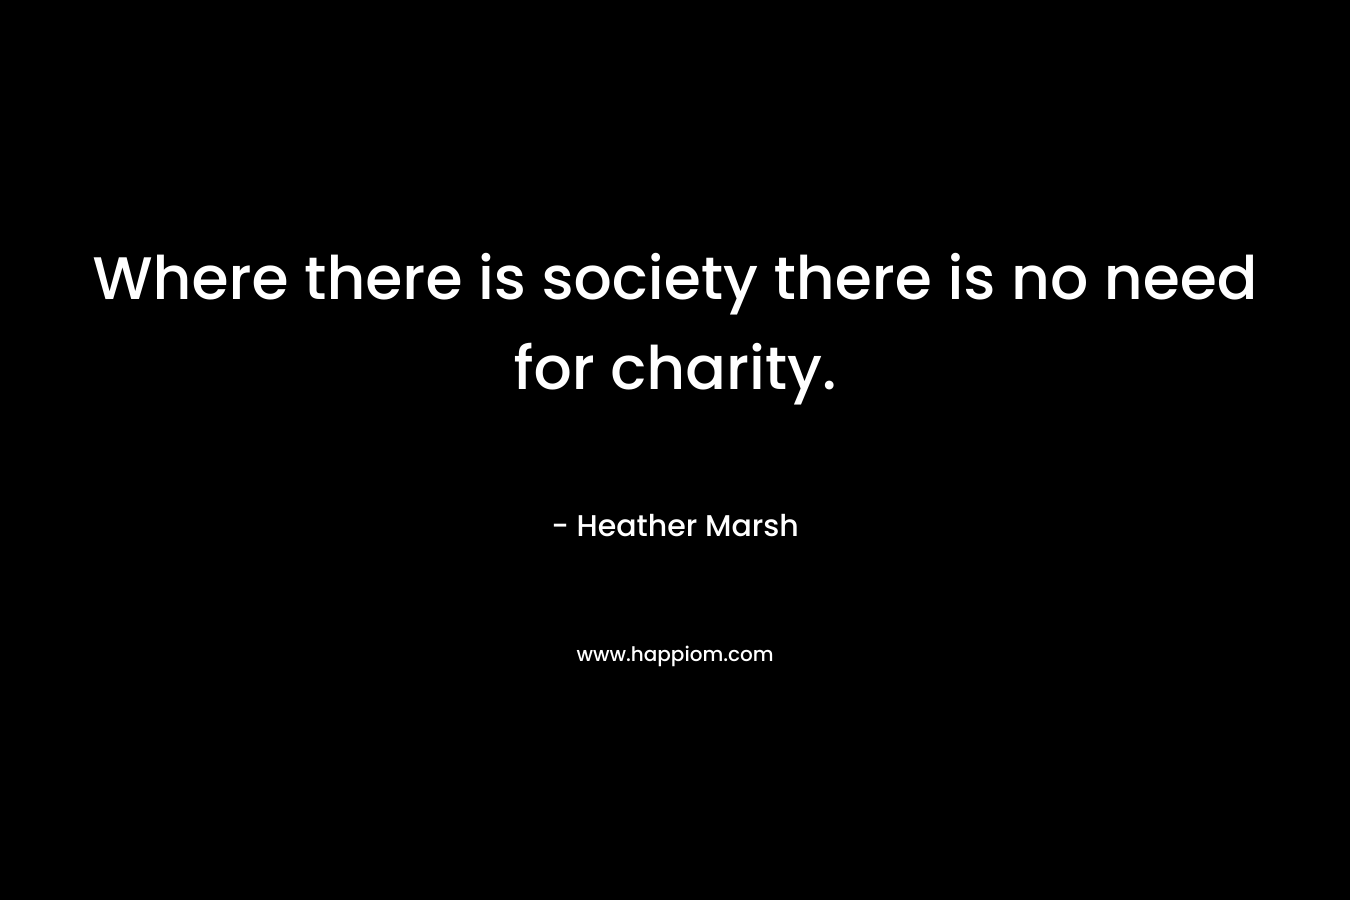 Where there is society there is no need for charity.